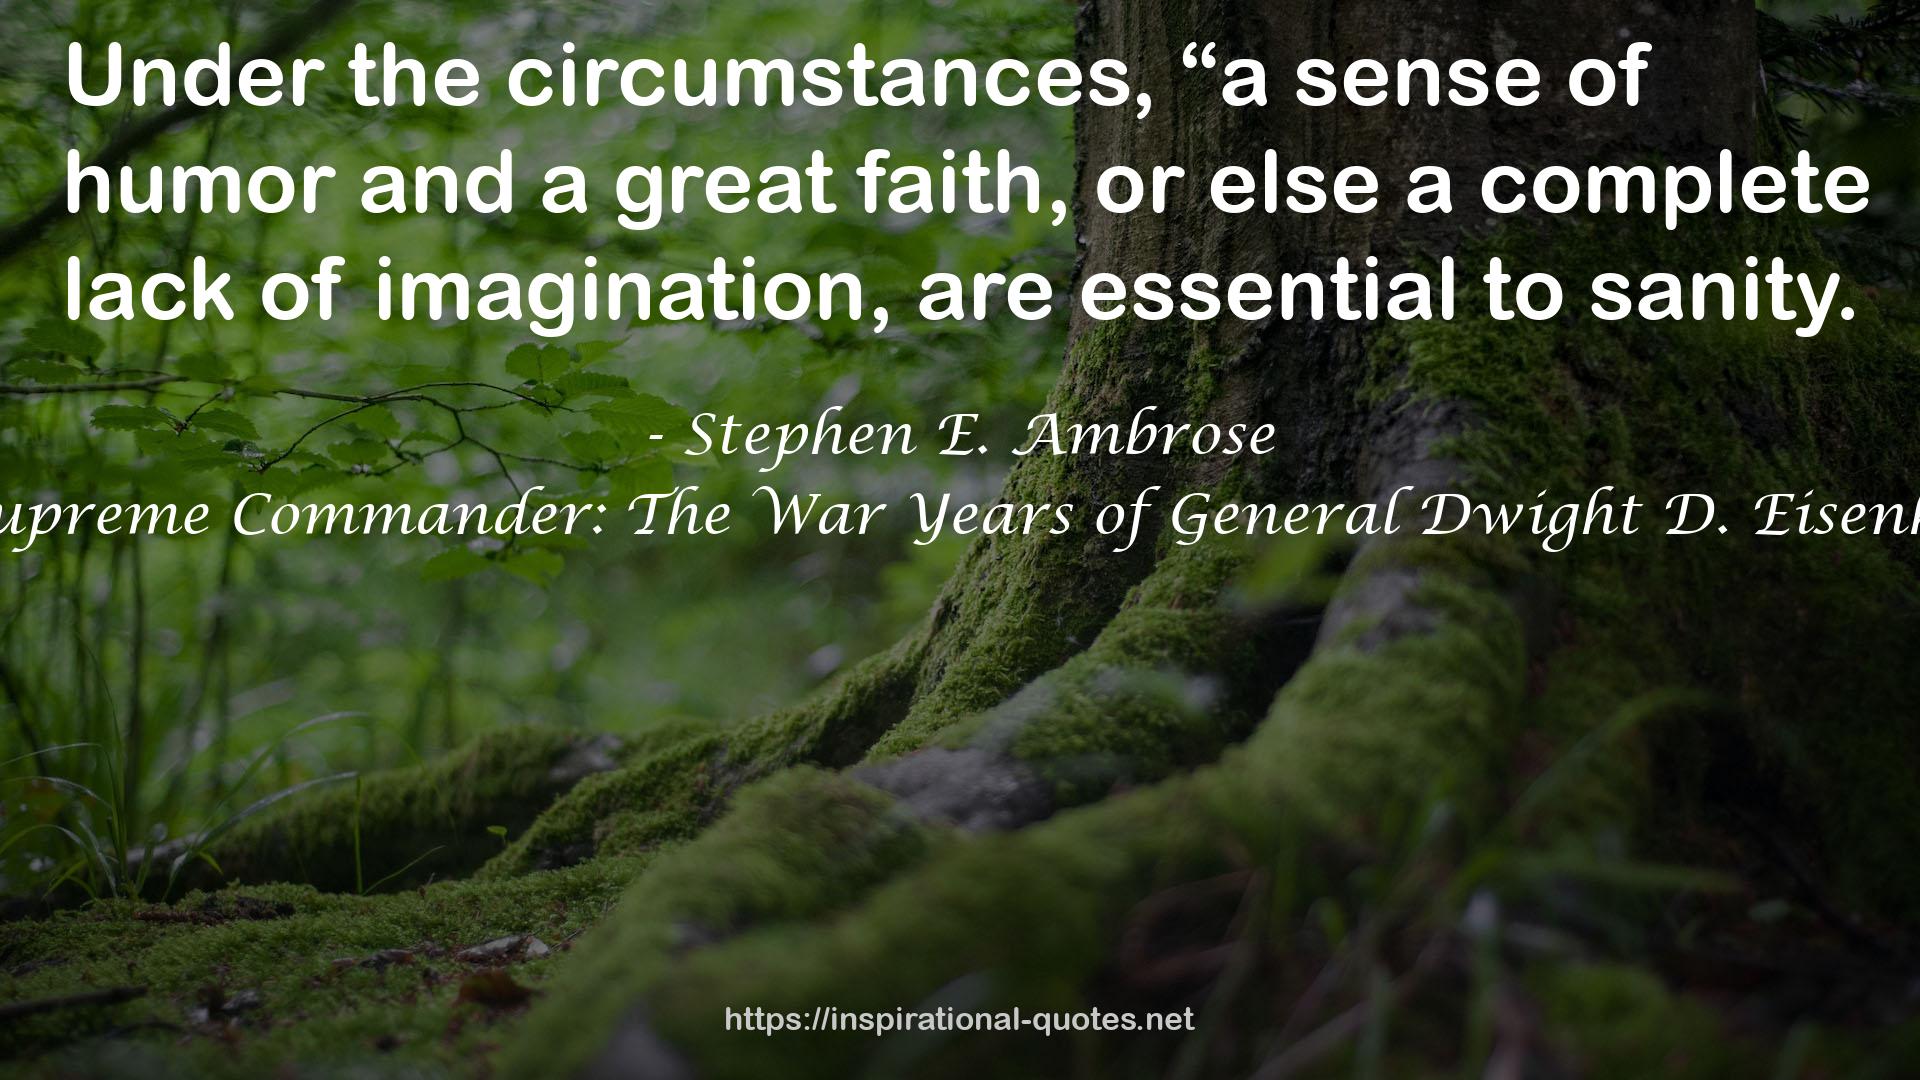 The Supreme Commander: The War Years of General Dwight D. Eisenhower QUOTES